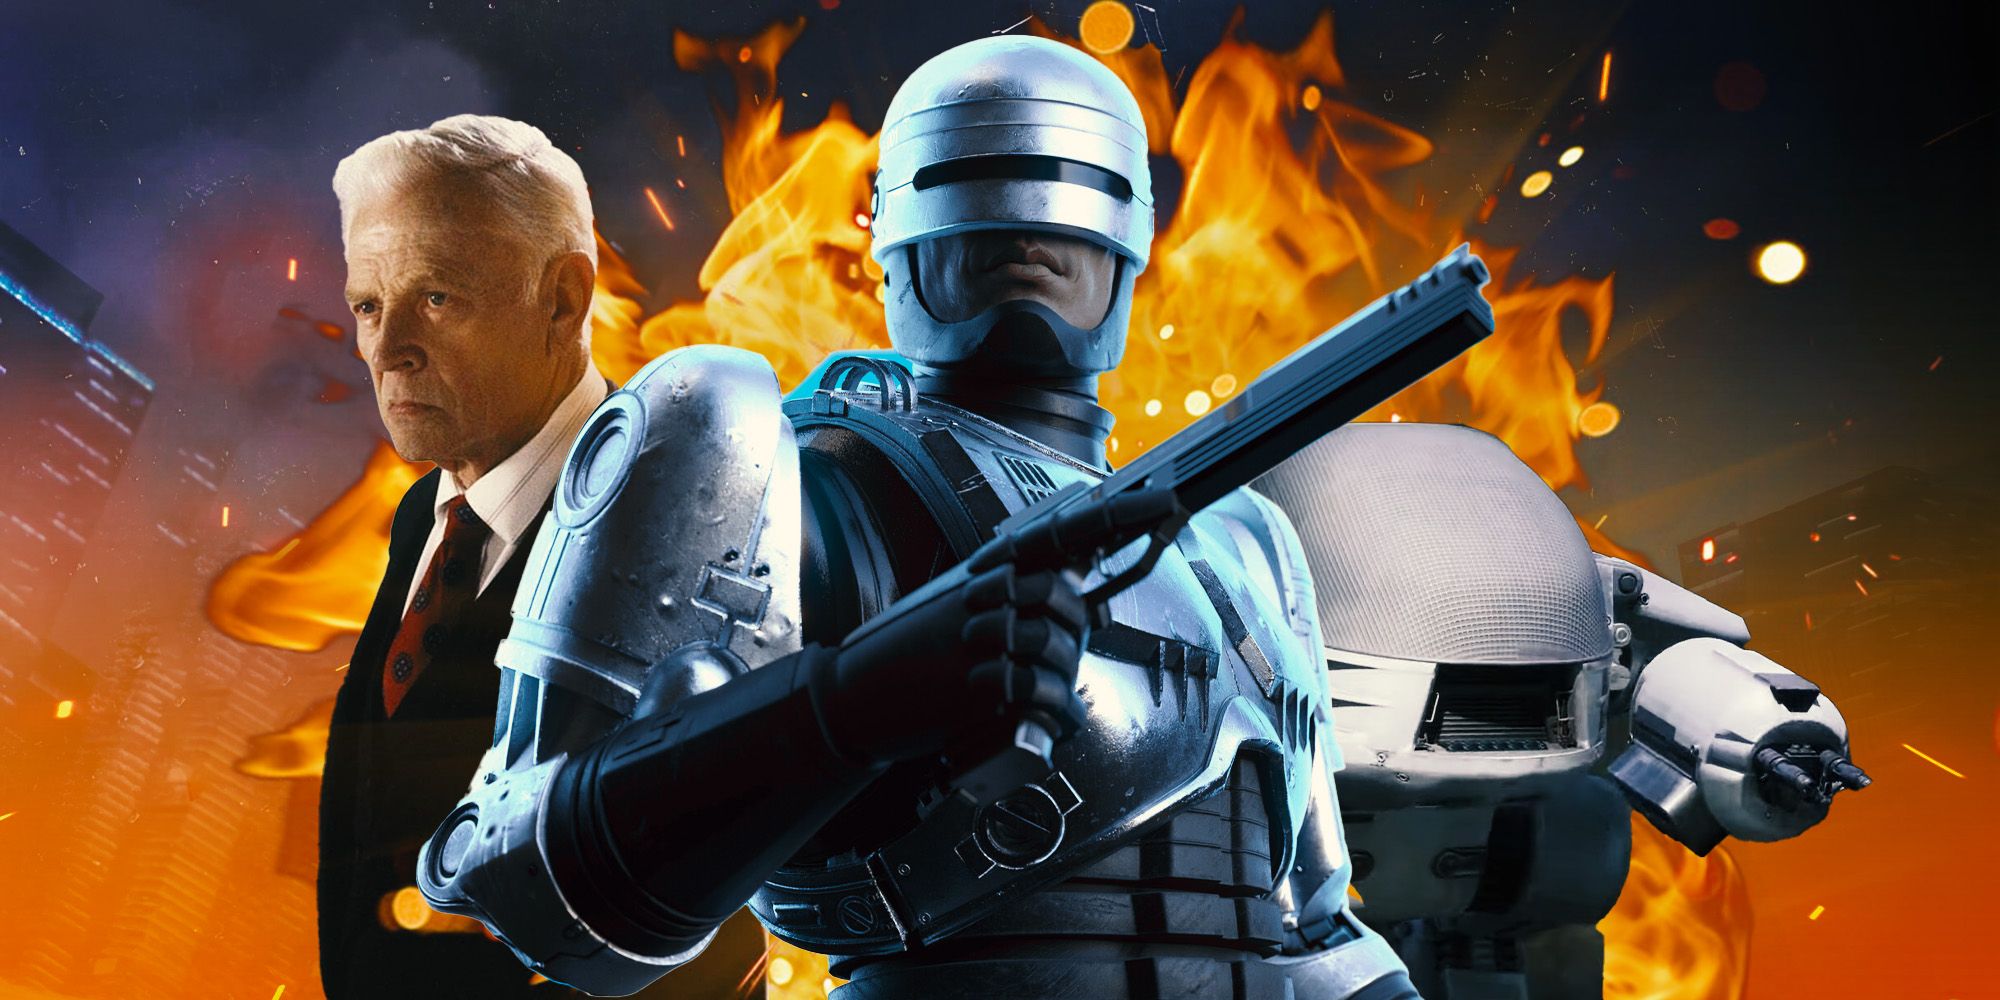 Robocop Rogue City Choices and Consequences - News